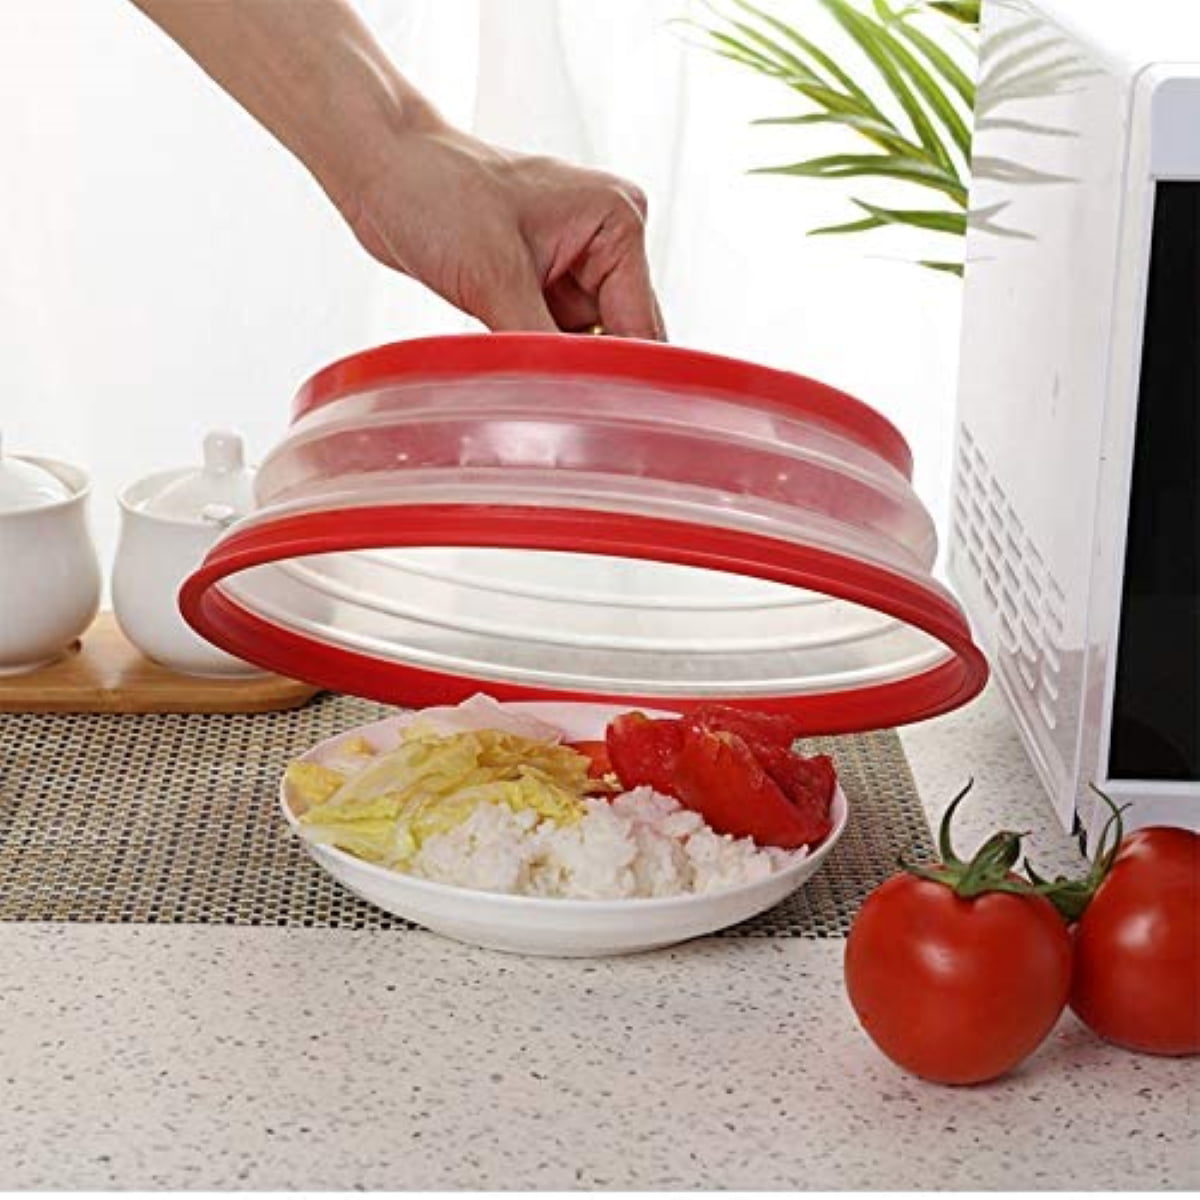 Microwave Cover for Food,Collapsible Microwave Splatter Cove,Fruit Drainer  Basket,BPA-Free Silicone & Plastic and Dishwasher Safe 10.5 inch (RED)…